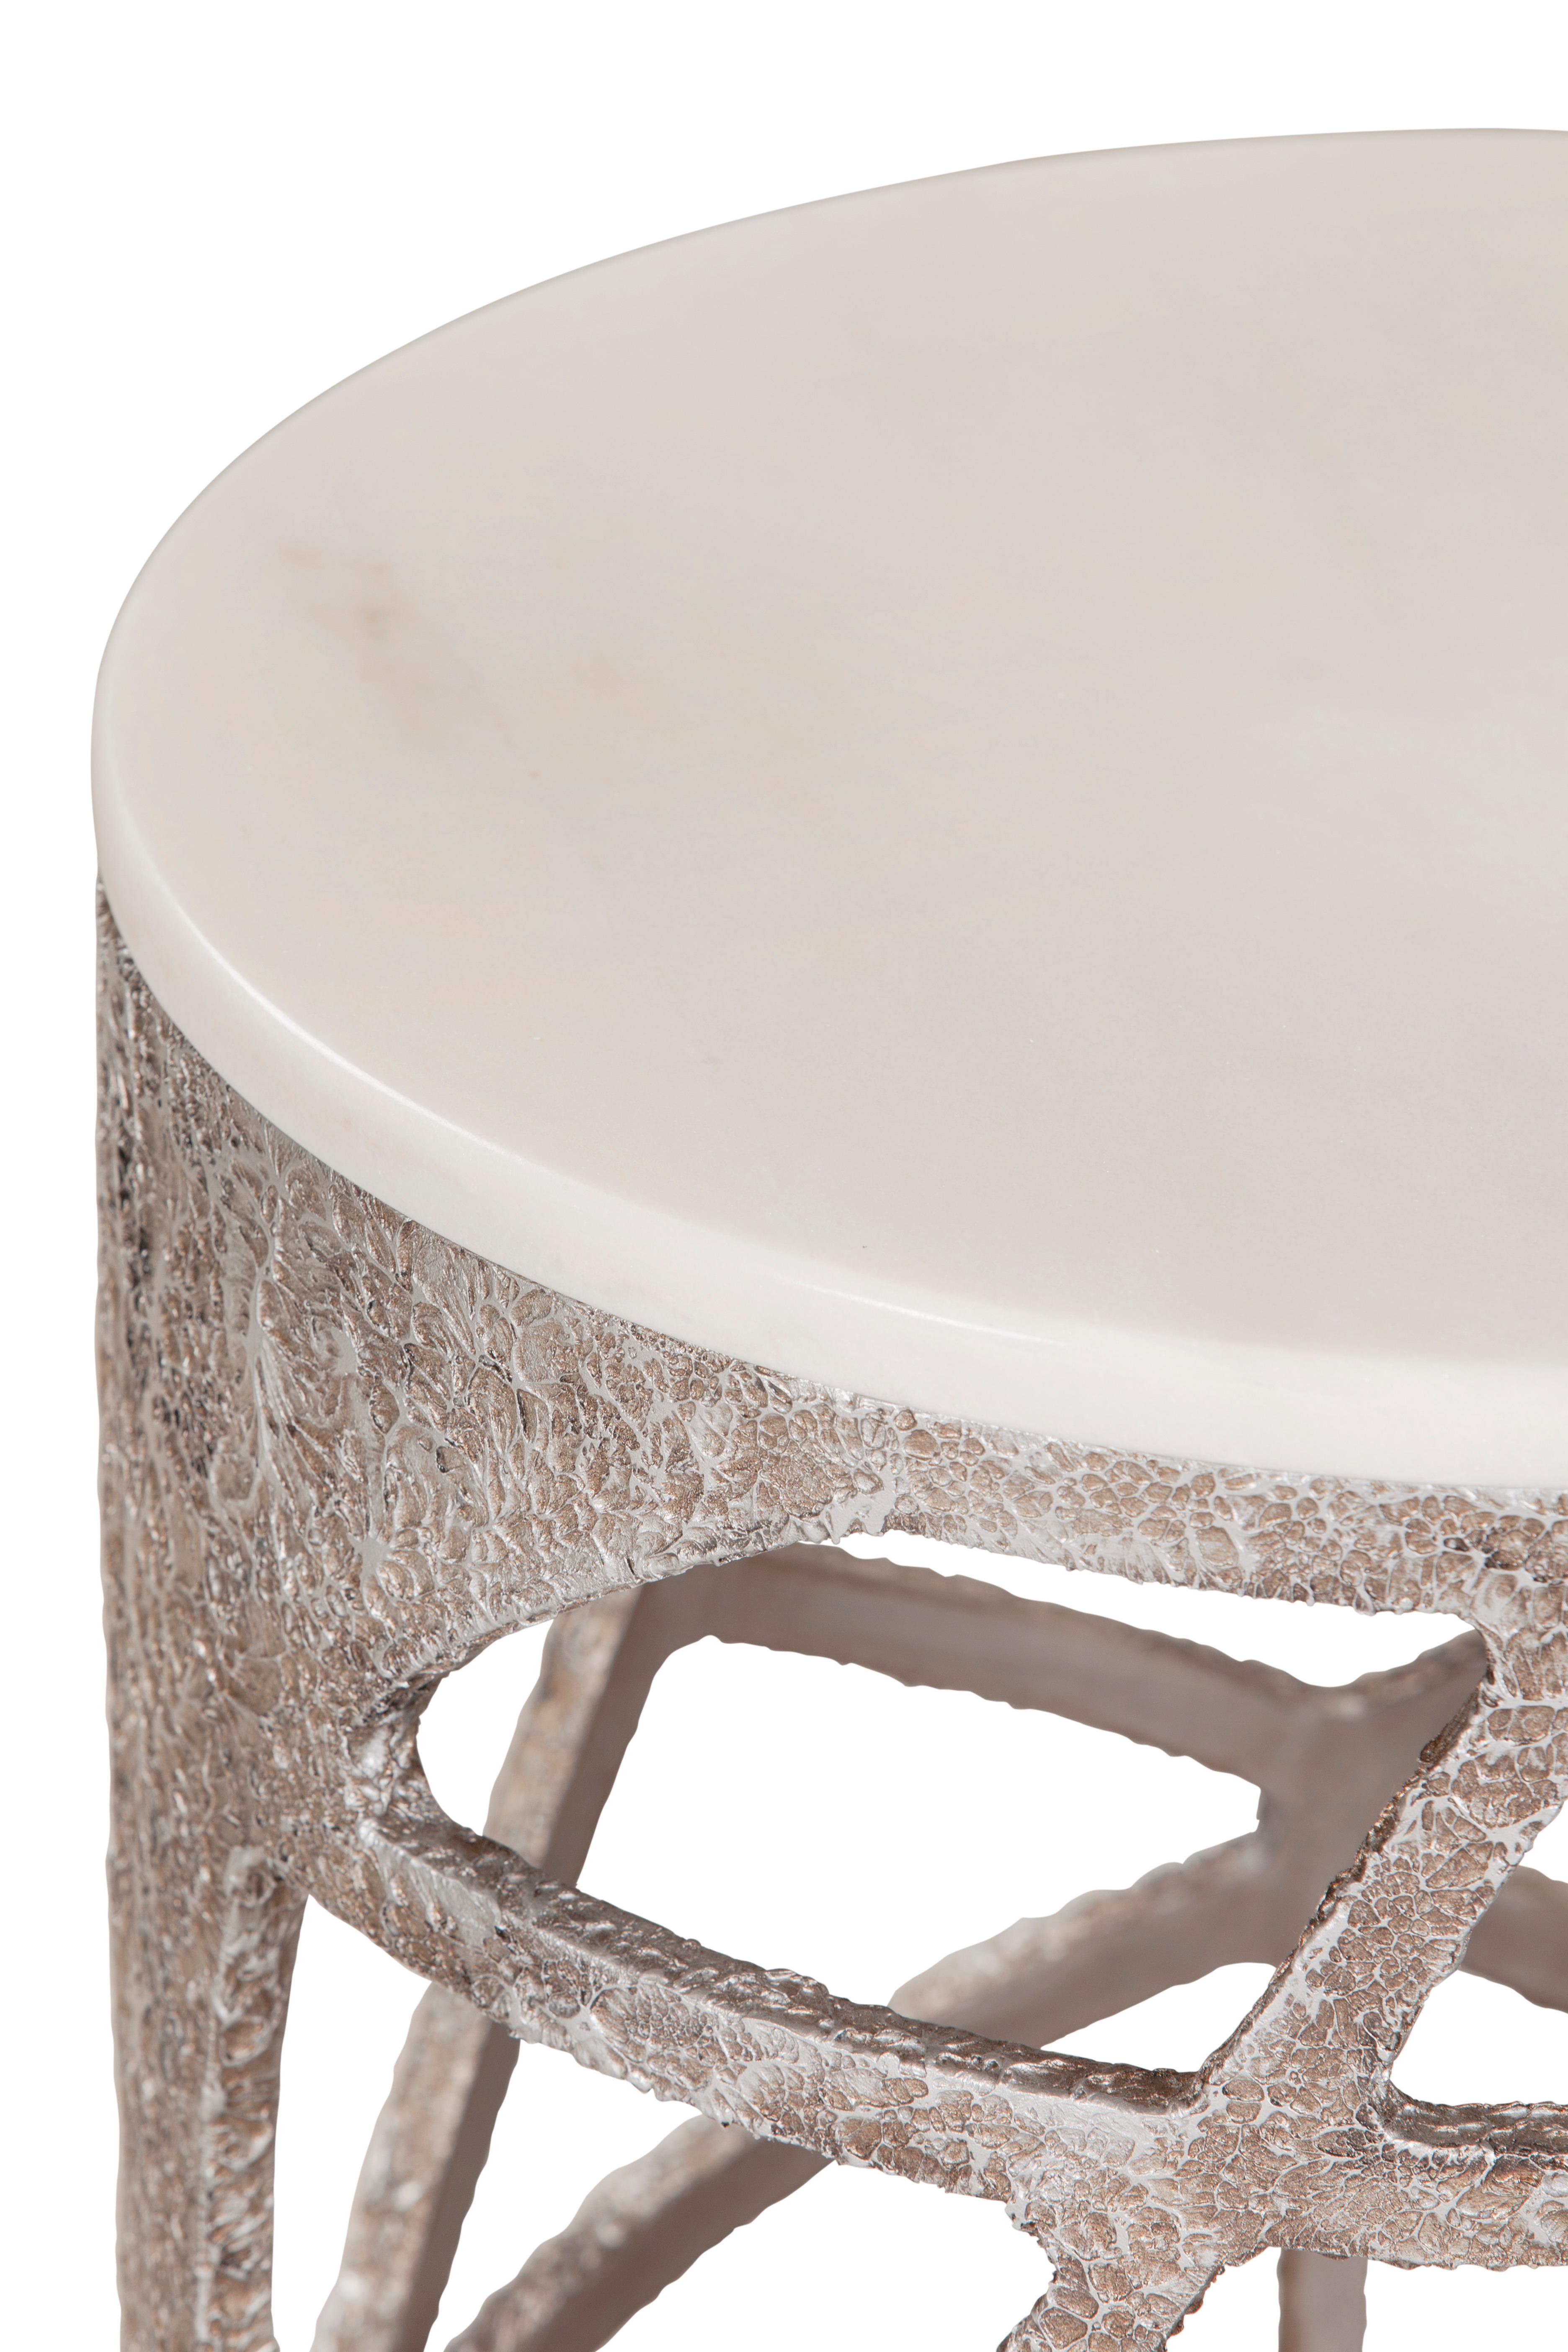 Modern Art Deco Pyrite Side Table, Calacatta Marble, Handmade in Portugal by Greenapple For Sale